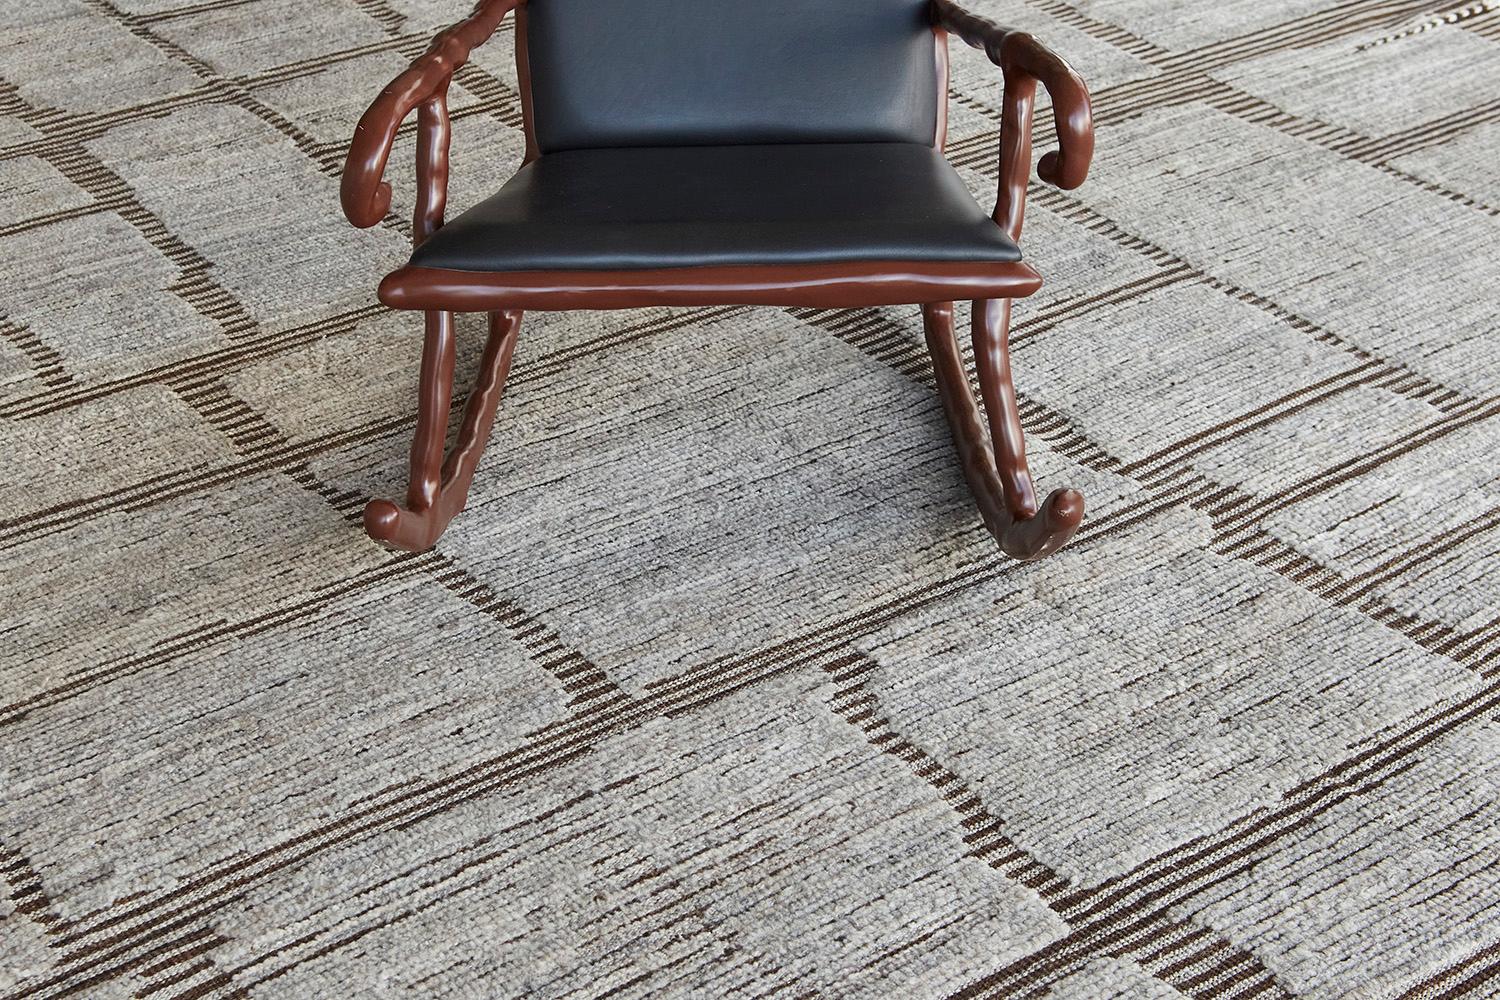 Maziere' is a handwoven wool piece with unique design elements that mirror roman masonry. This luxurious striped brown and khaki pile weave and natural brown shag make for the perfect contemporary. Maziere is designed in Los Angeles for the modern